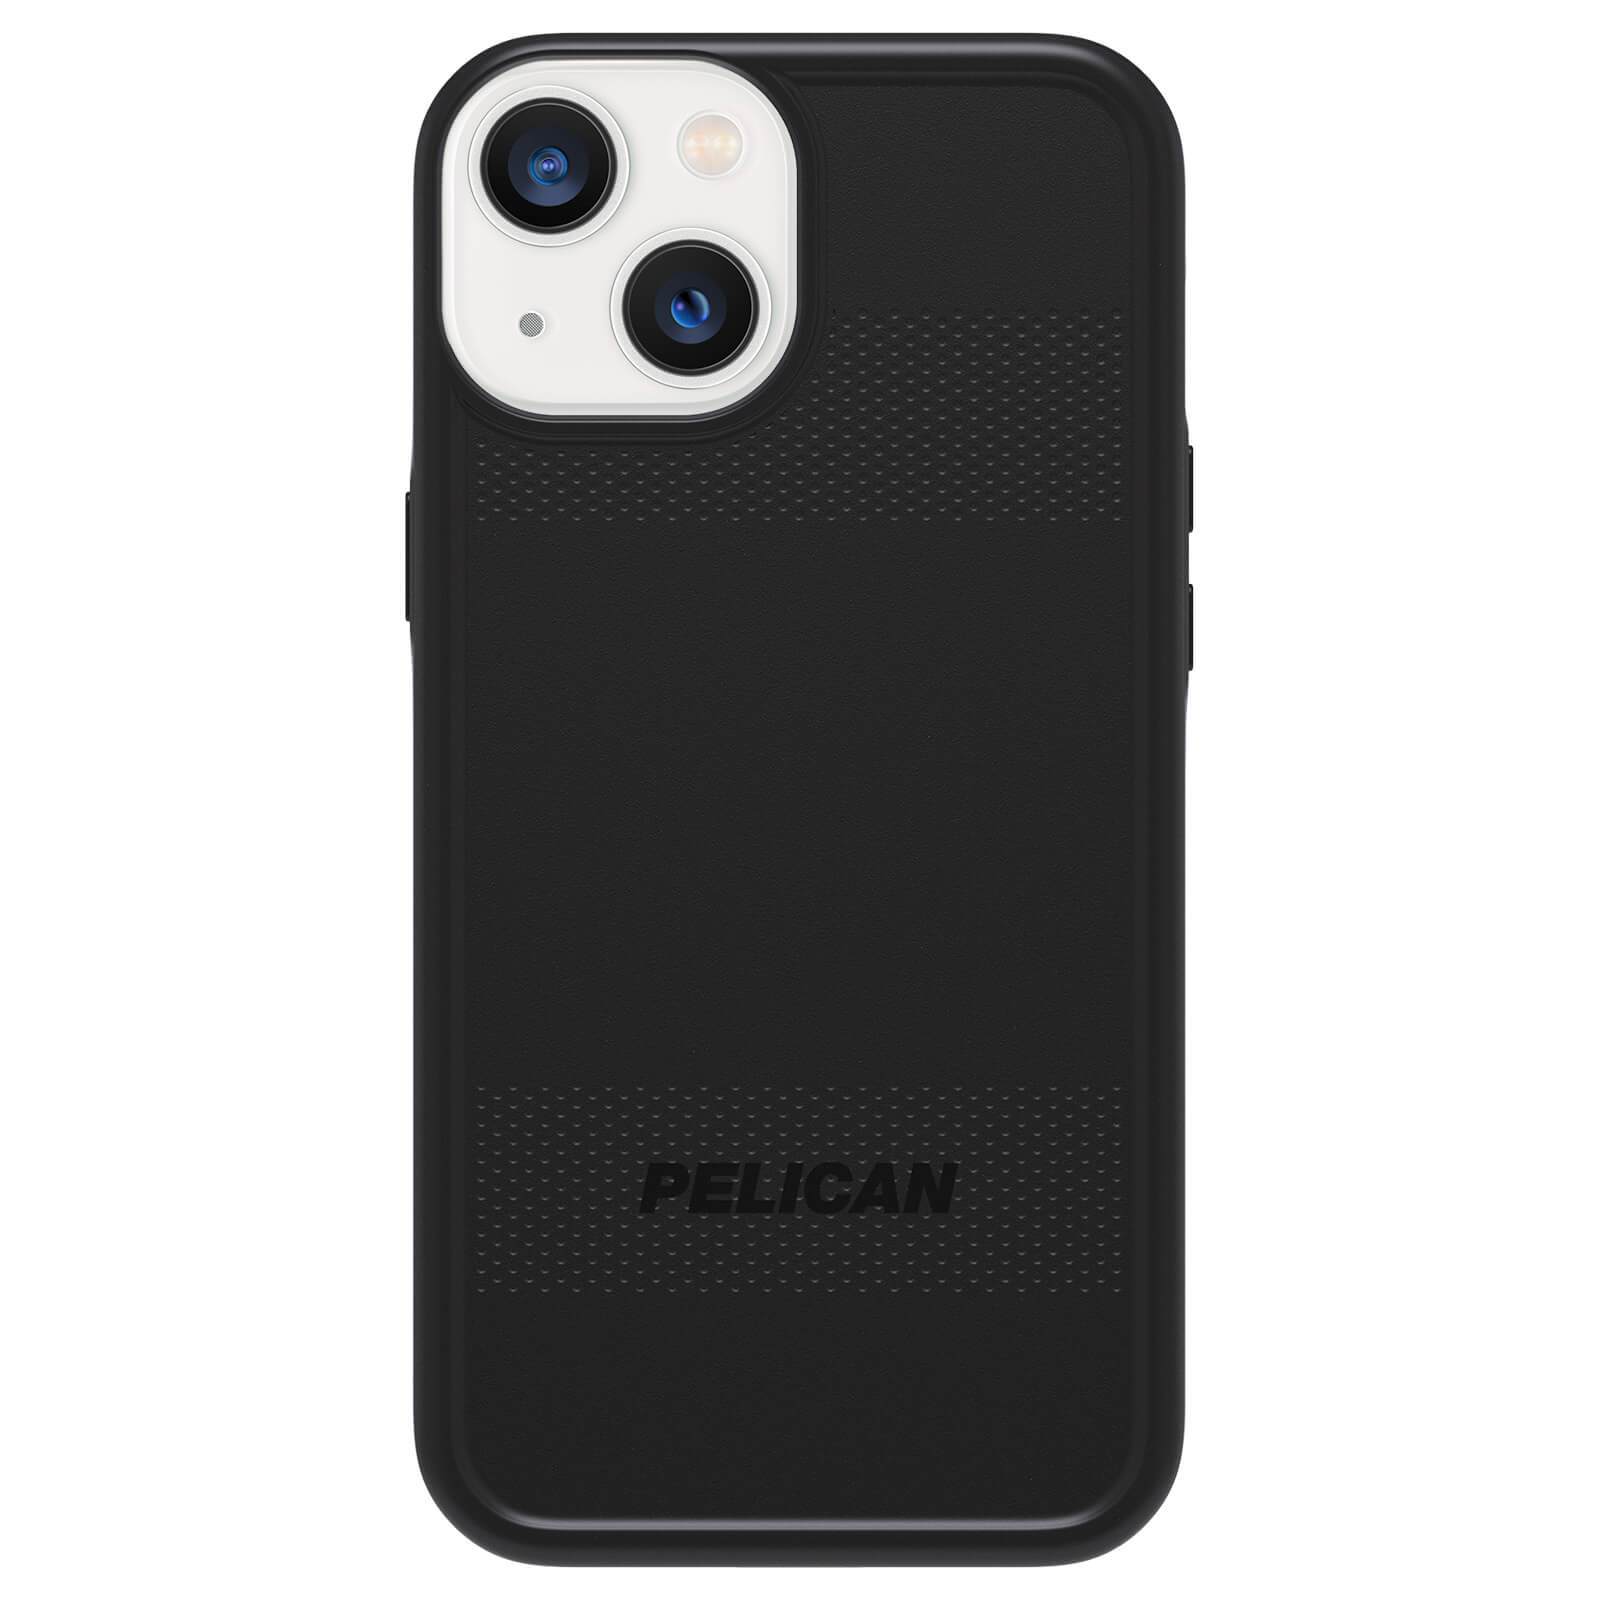 Pelican Protector Case for iPhone 13 Devices - Black